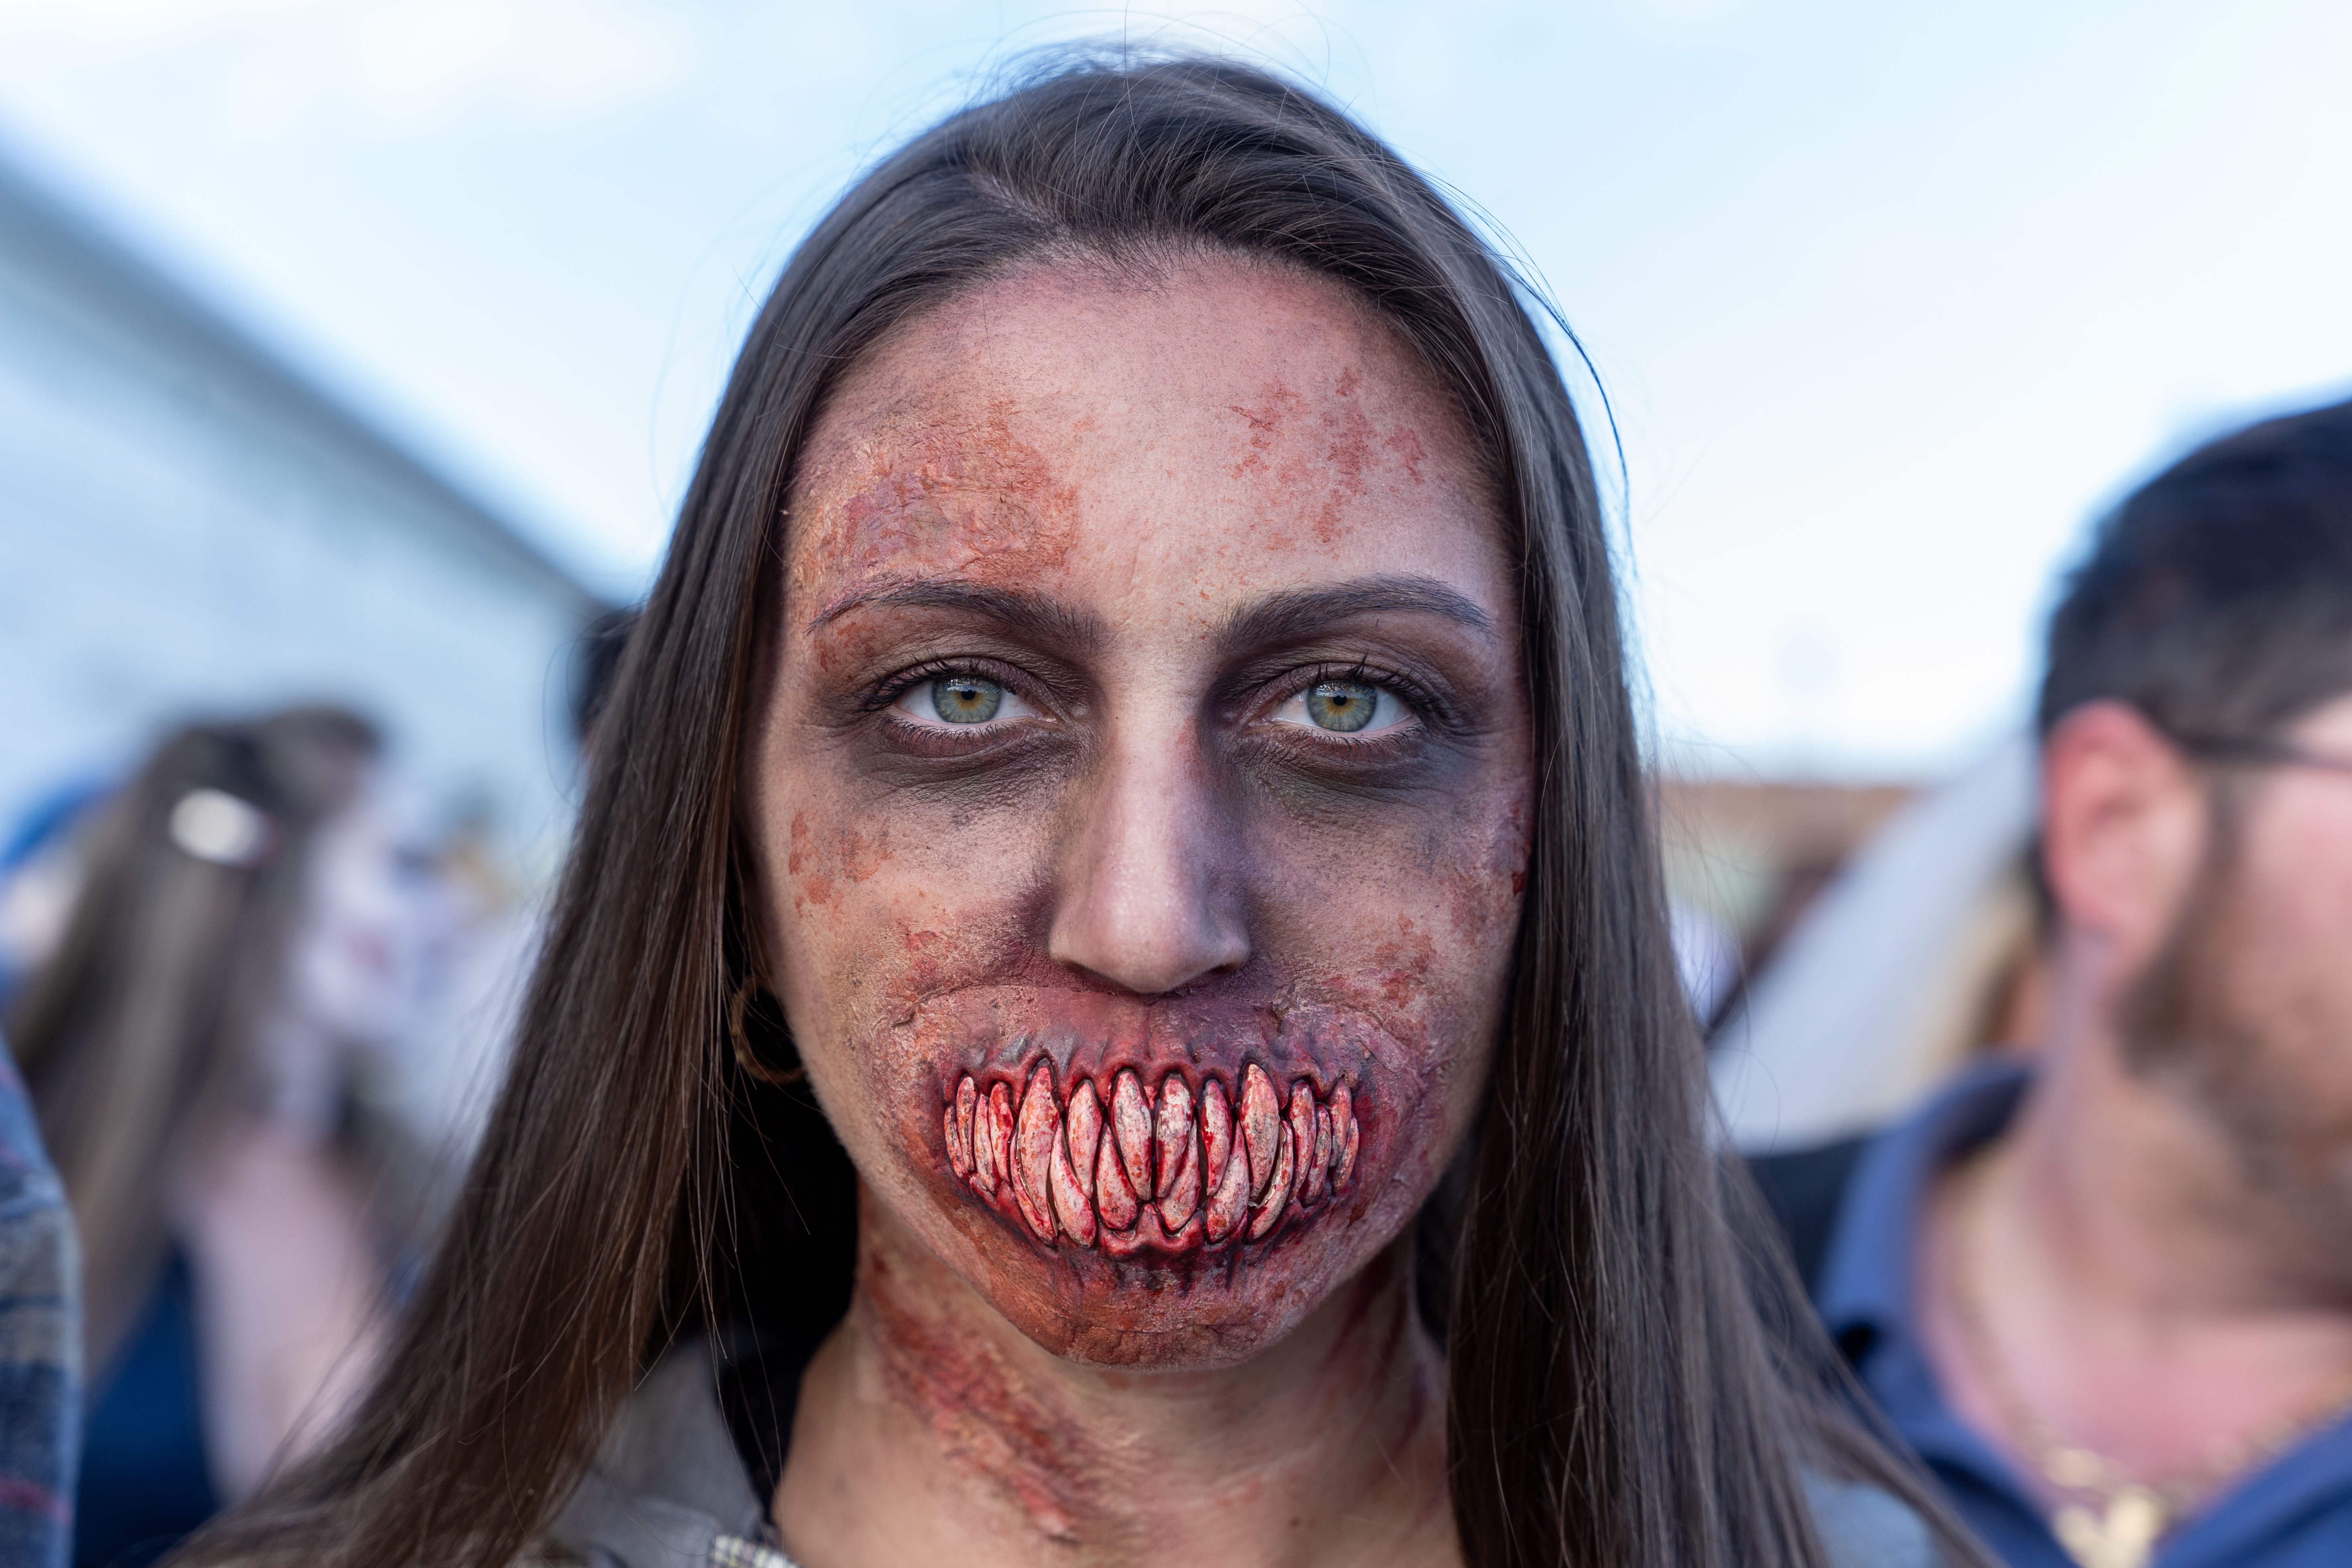 Christine Dibiase participates as a scary zombie in the 14th Asbury Park Zombie Walk in Asbury Park on Saturday, October 8, 2022. The zombie walk held its first themed year with the theme being 80's and 90's punk and metal.